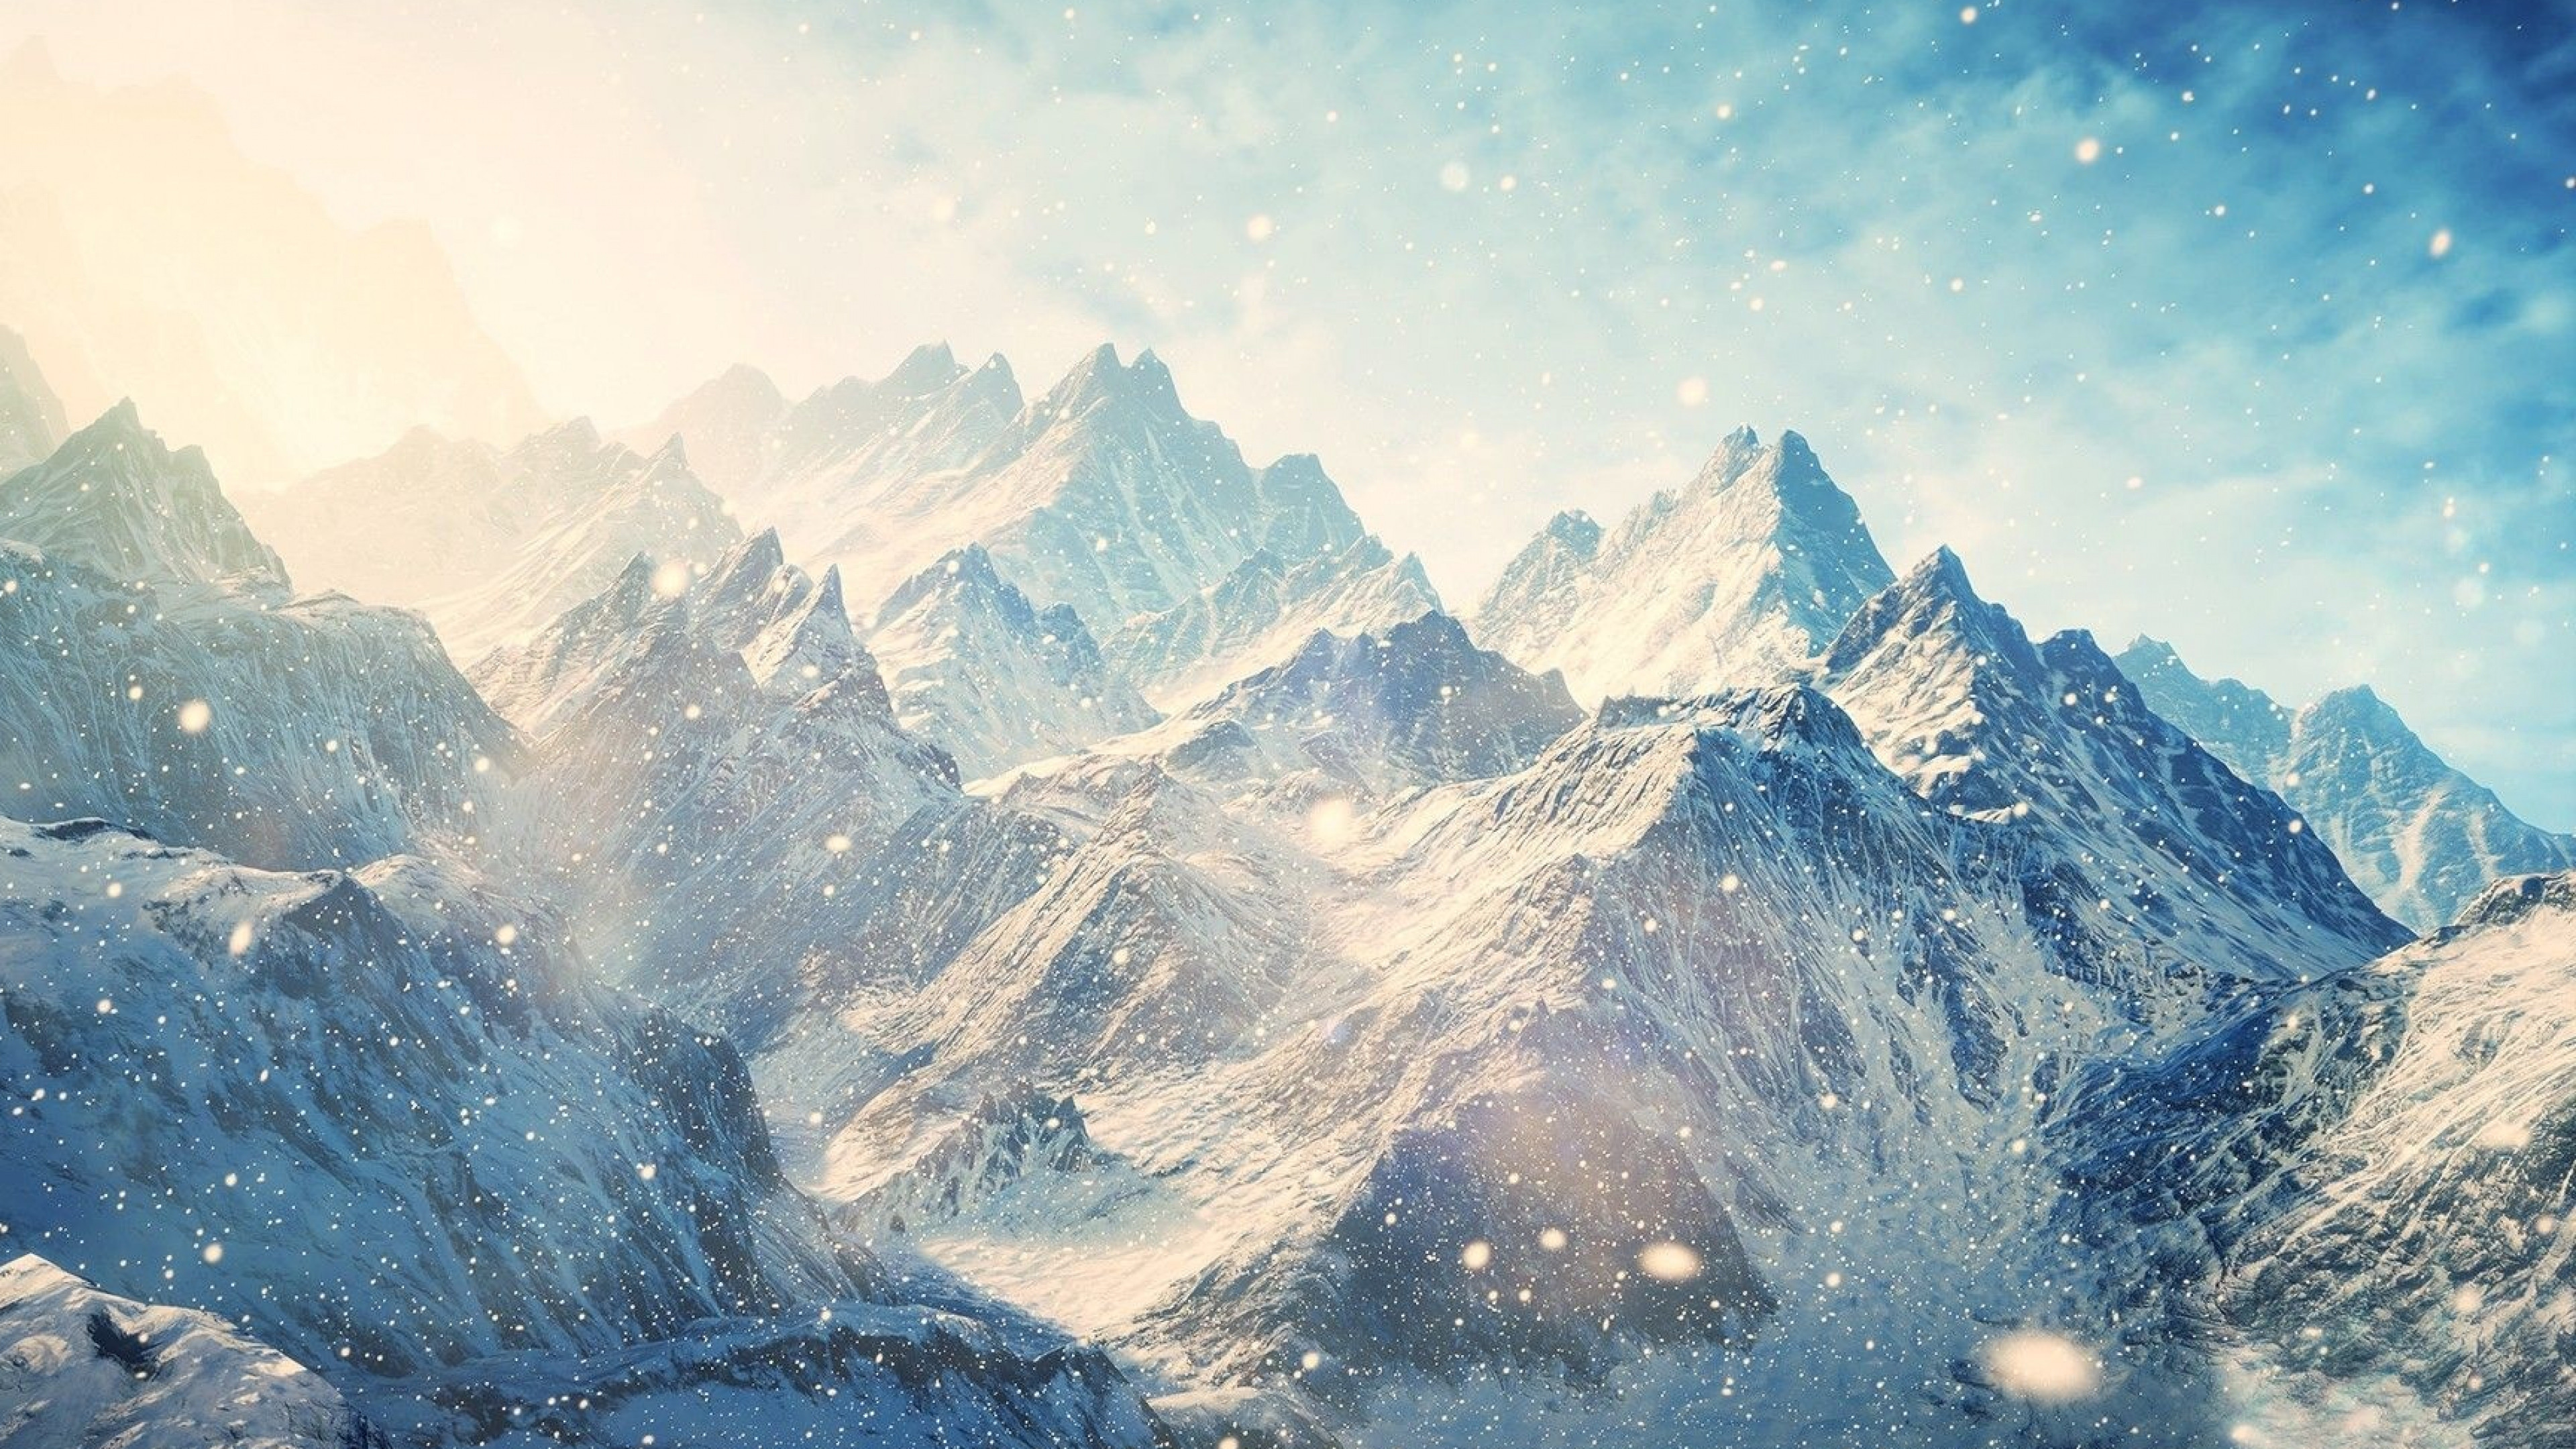 500+] Snow Mountain Wallpapers | Wallpapers.com